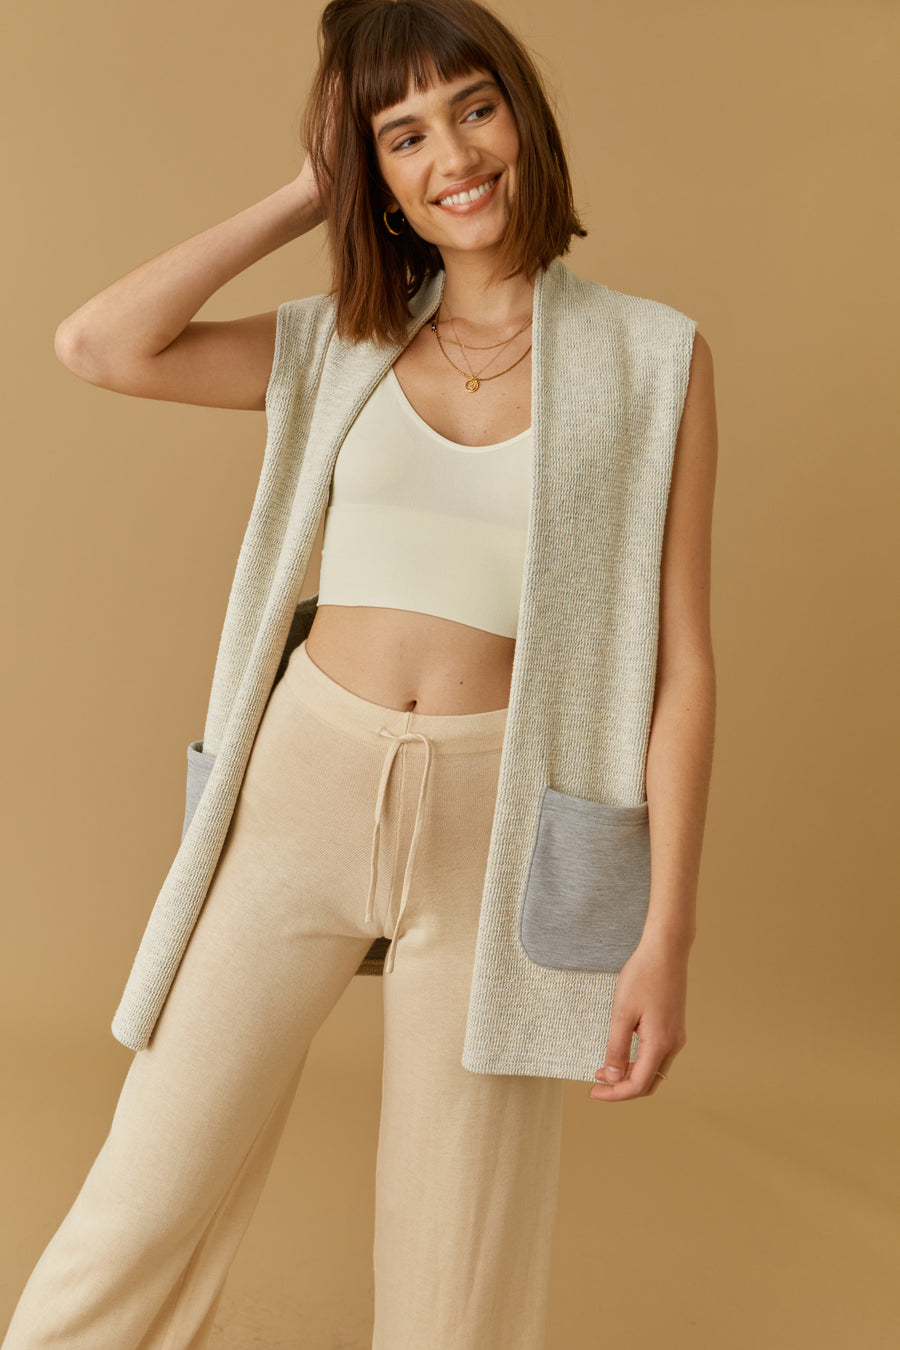 No Srcipt image - Images of 2 of 5 Everyday Cozy Grey Vest with double pockets